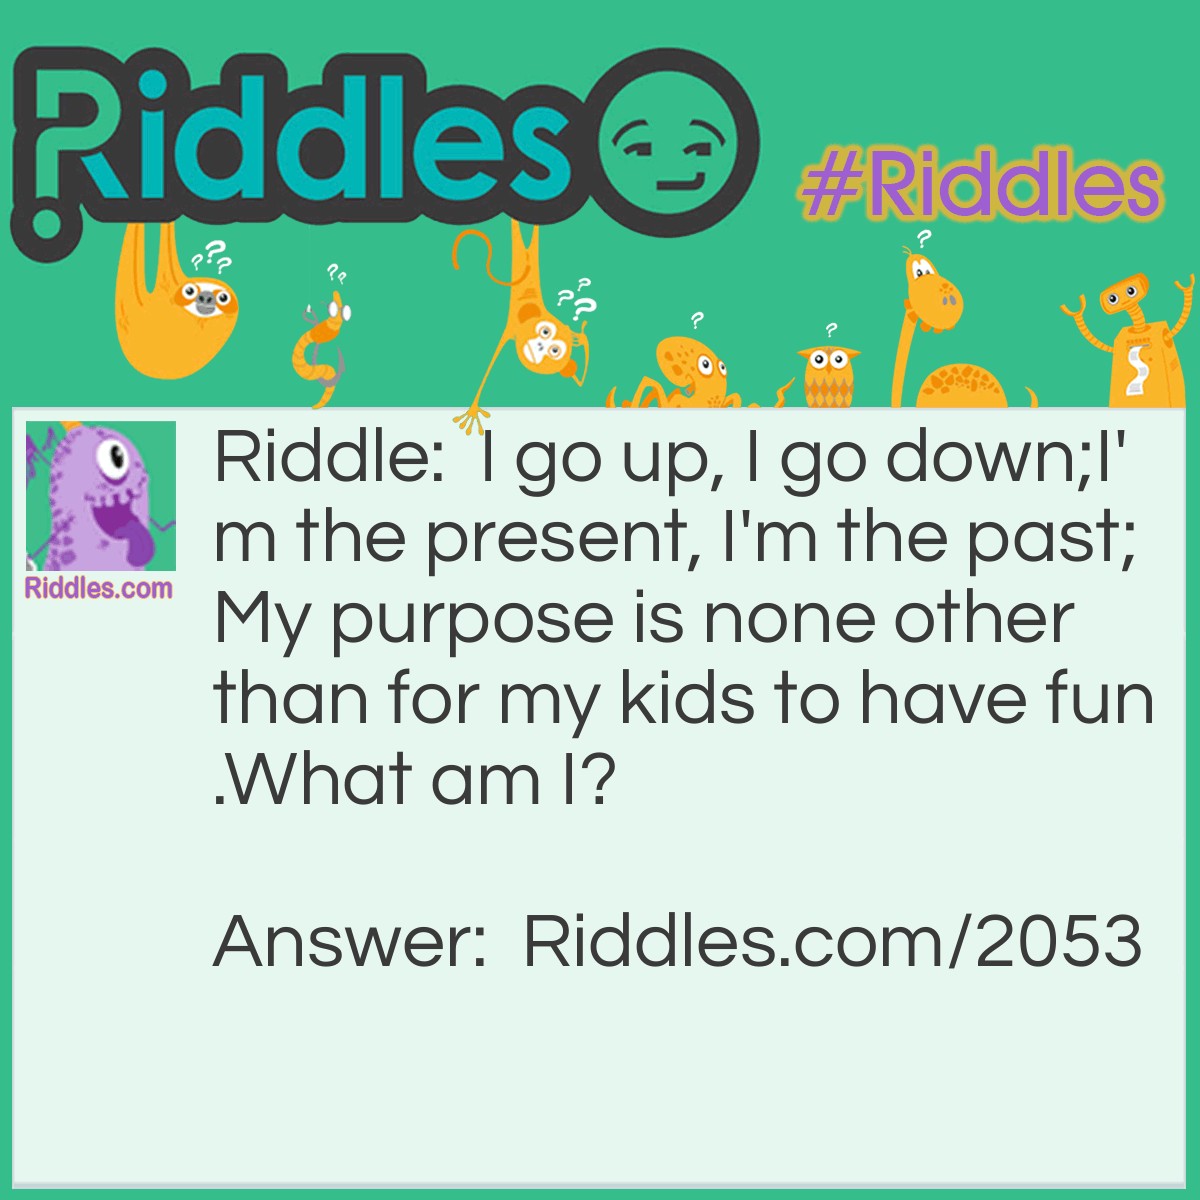 Riddle: I go up, I go down;I'm the present, I'm the past;My purpose is none other than for my kids to have fun.What am I? Answer: A See-Saw.